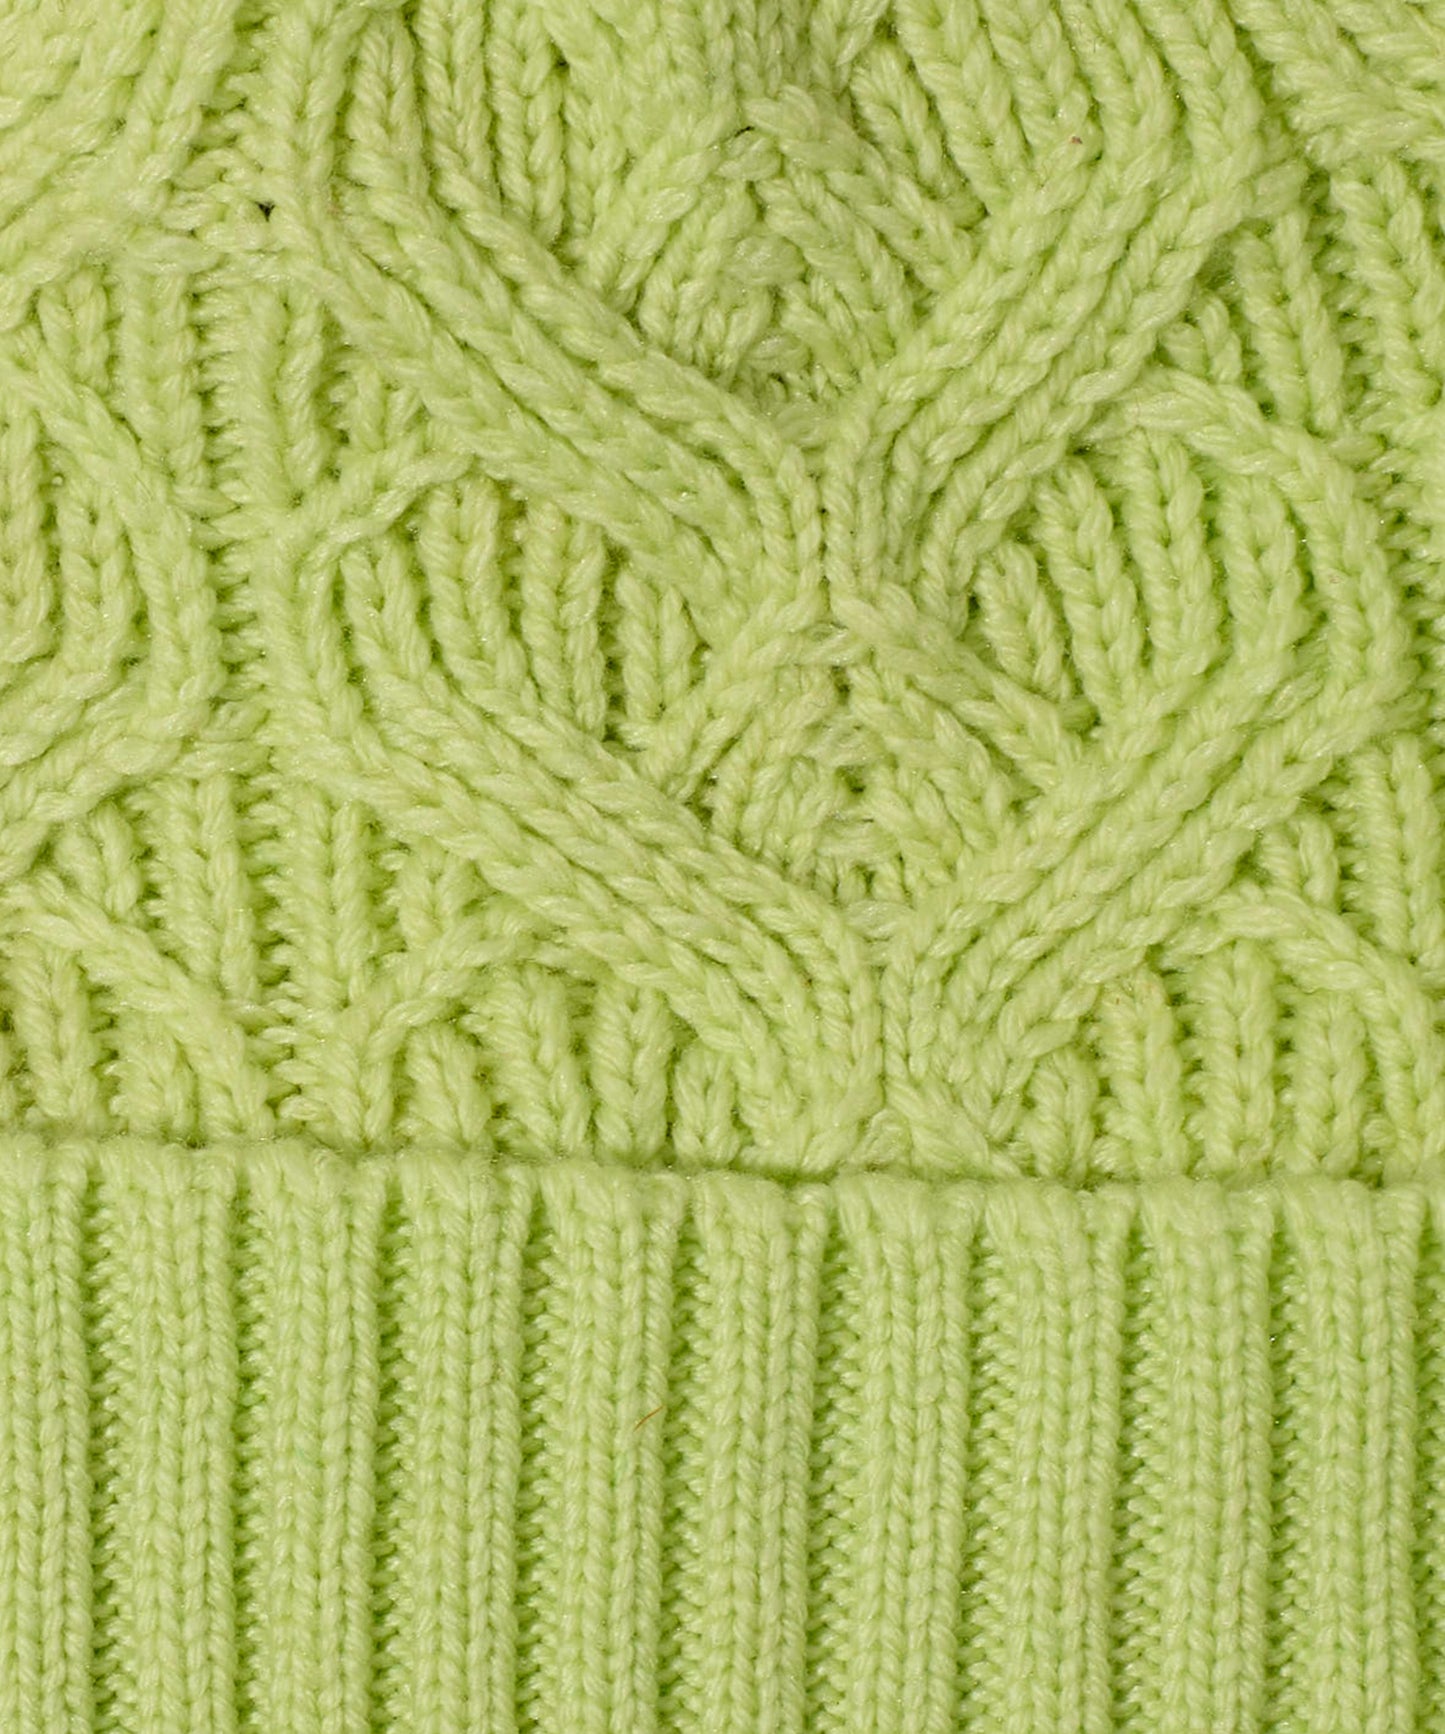 Loopy Cable Pom Hat in color Electric Lime